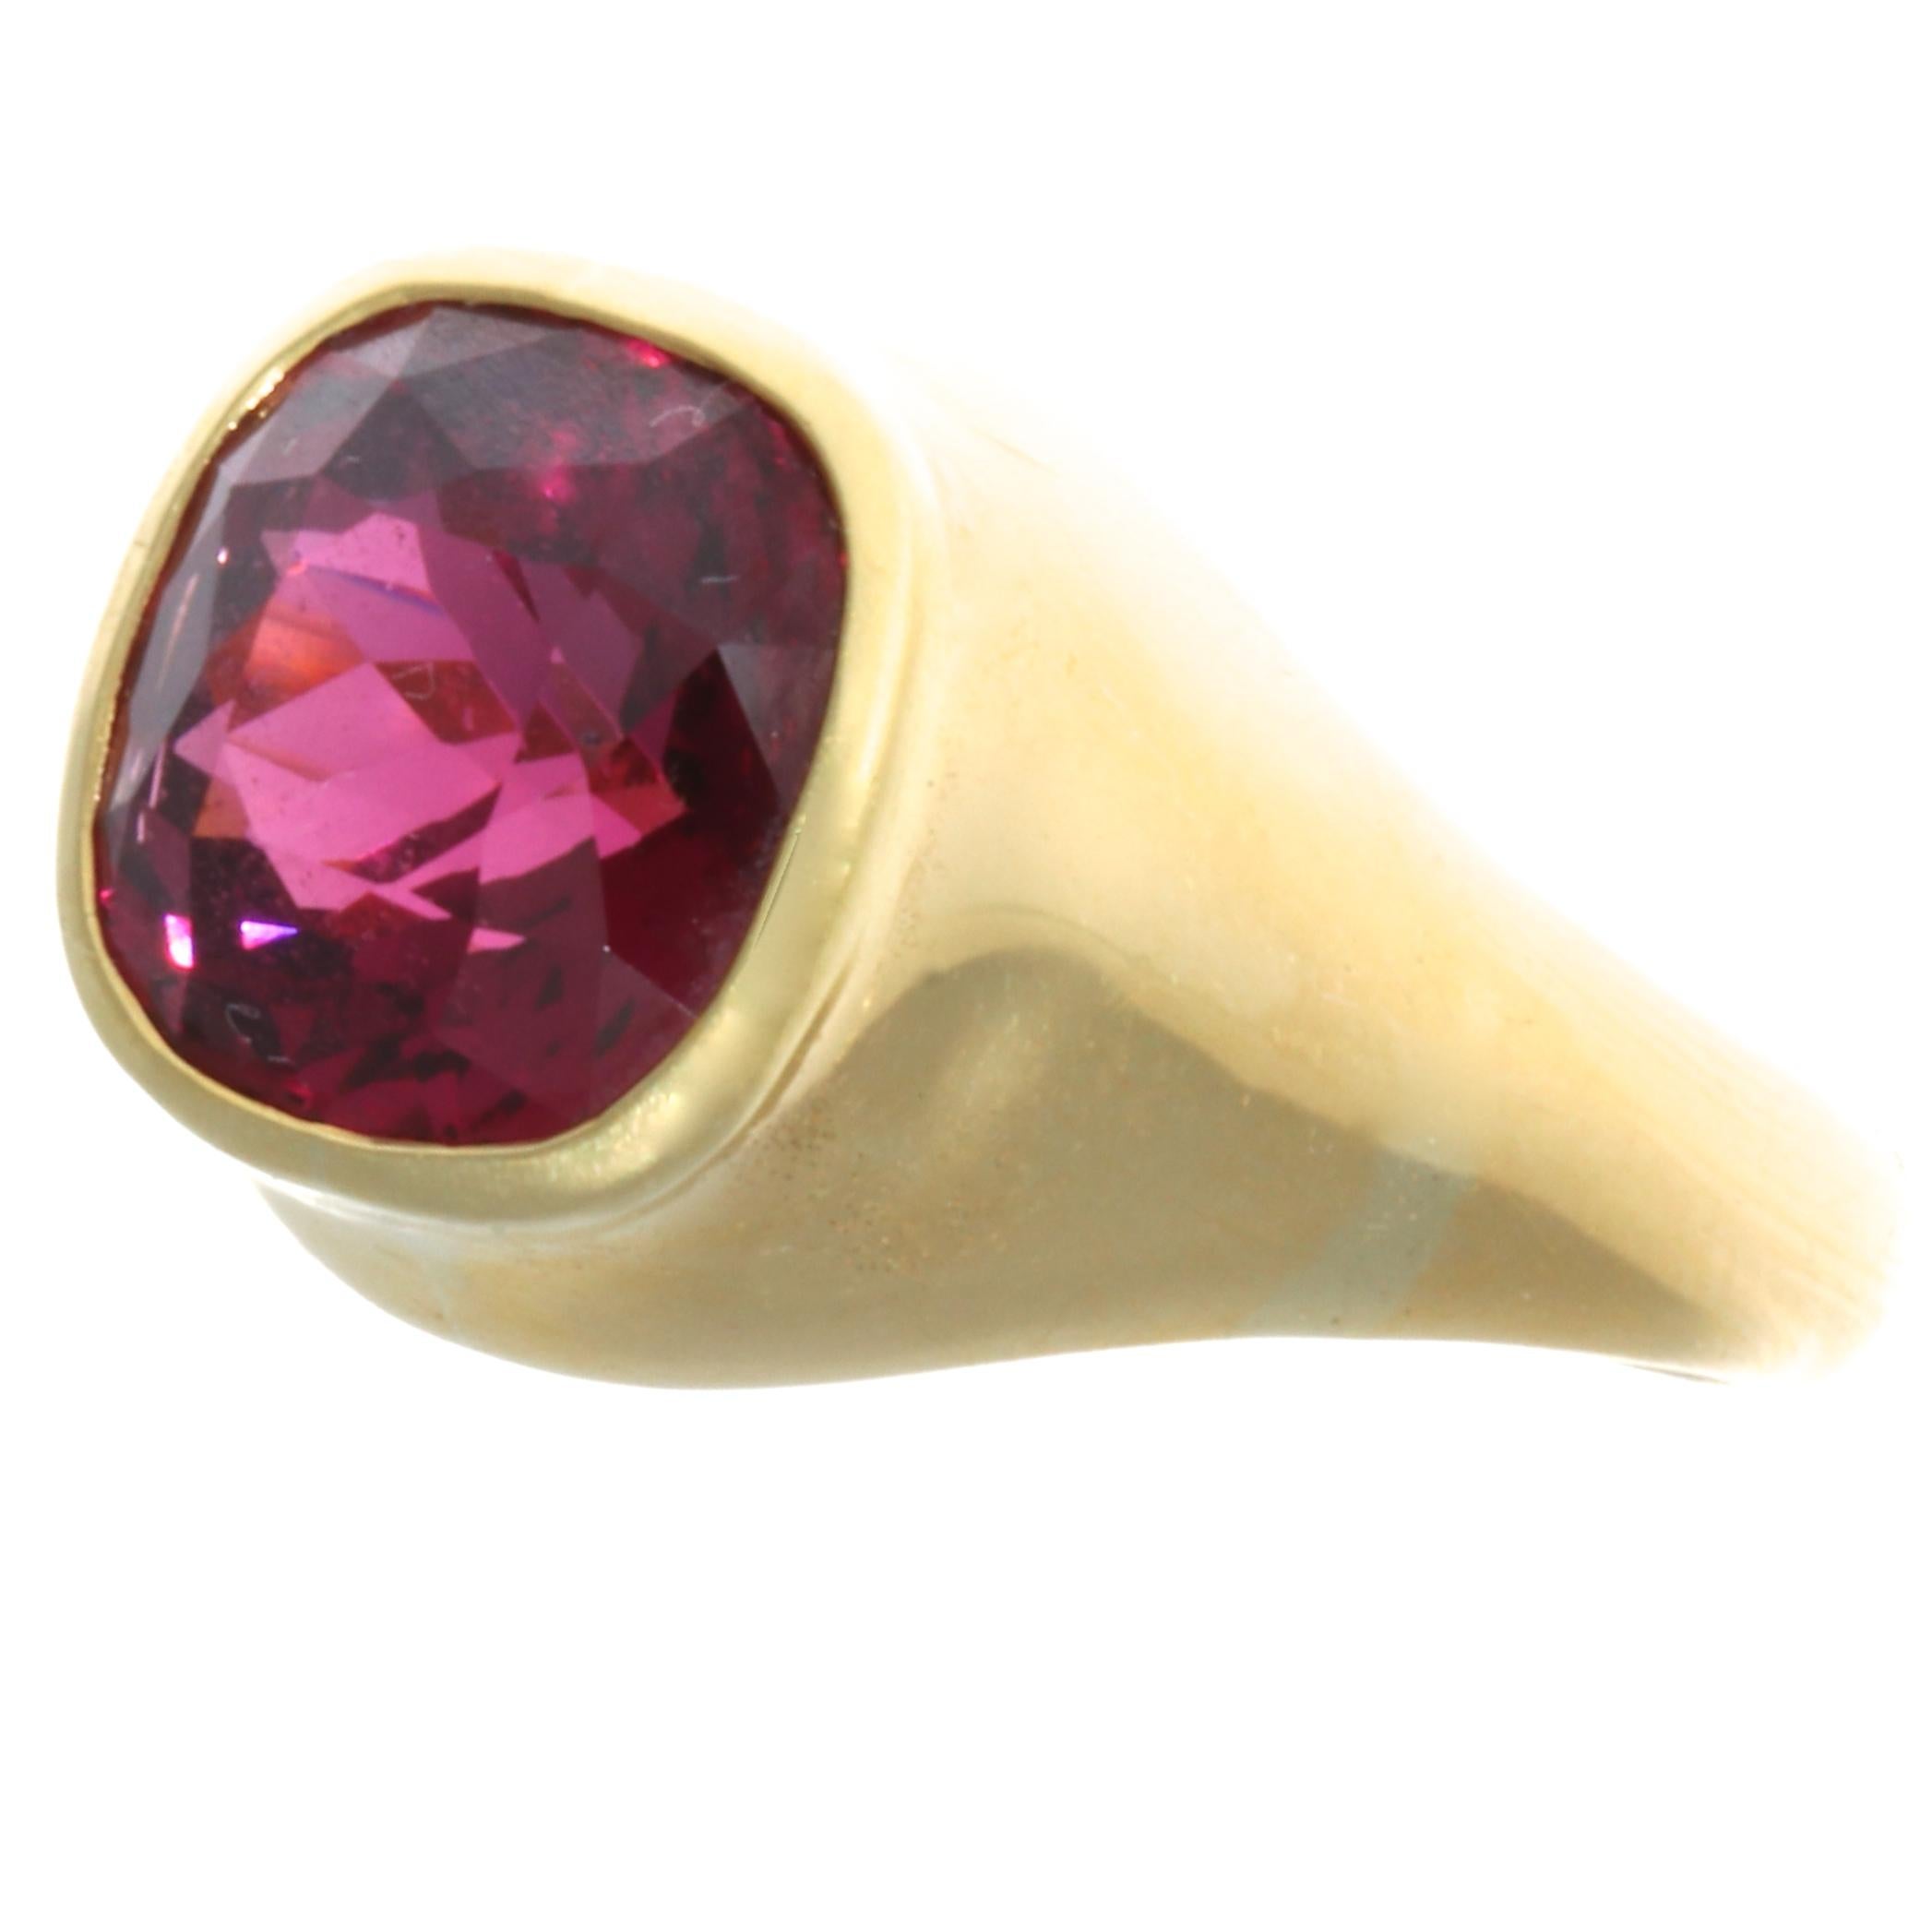 When Angela Cummings of Tiffany decides to use rhodolite, rest assured they will use the best quality.  Rhodolite is a varietal name for rose-pink to red mineral pyrope, a species in the garnet group. This stone exhibits a fiery red color, so beware